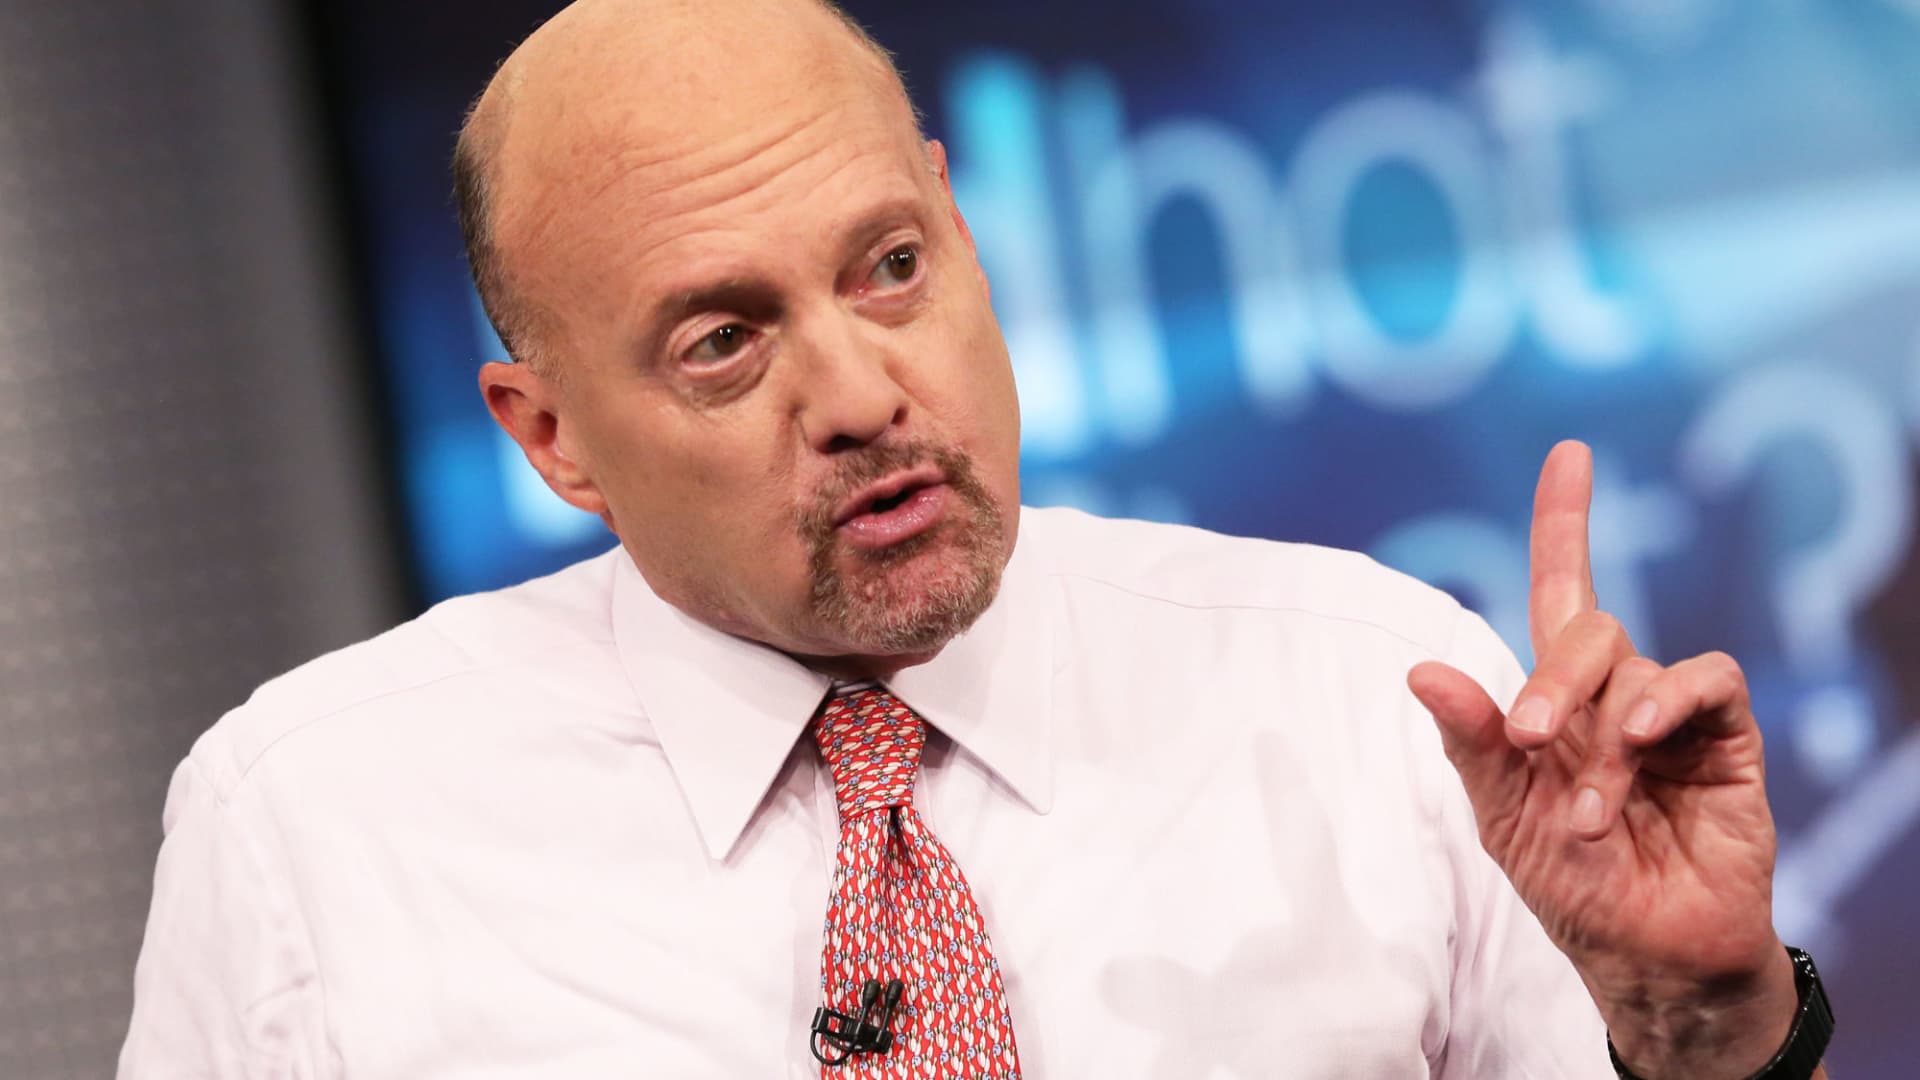 Last week’s rally is a reminder to watch for bounces during market downturns, Jim Cramer says